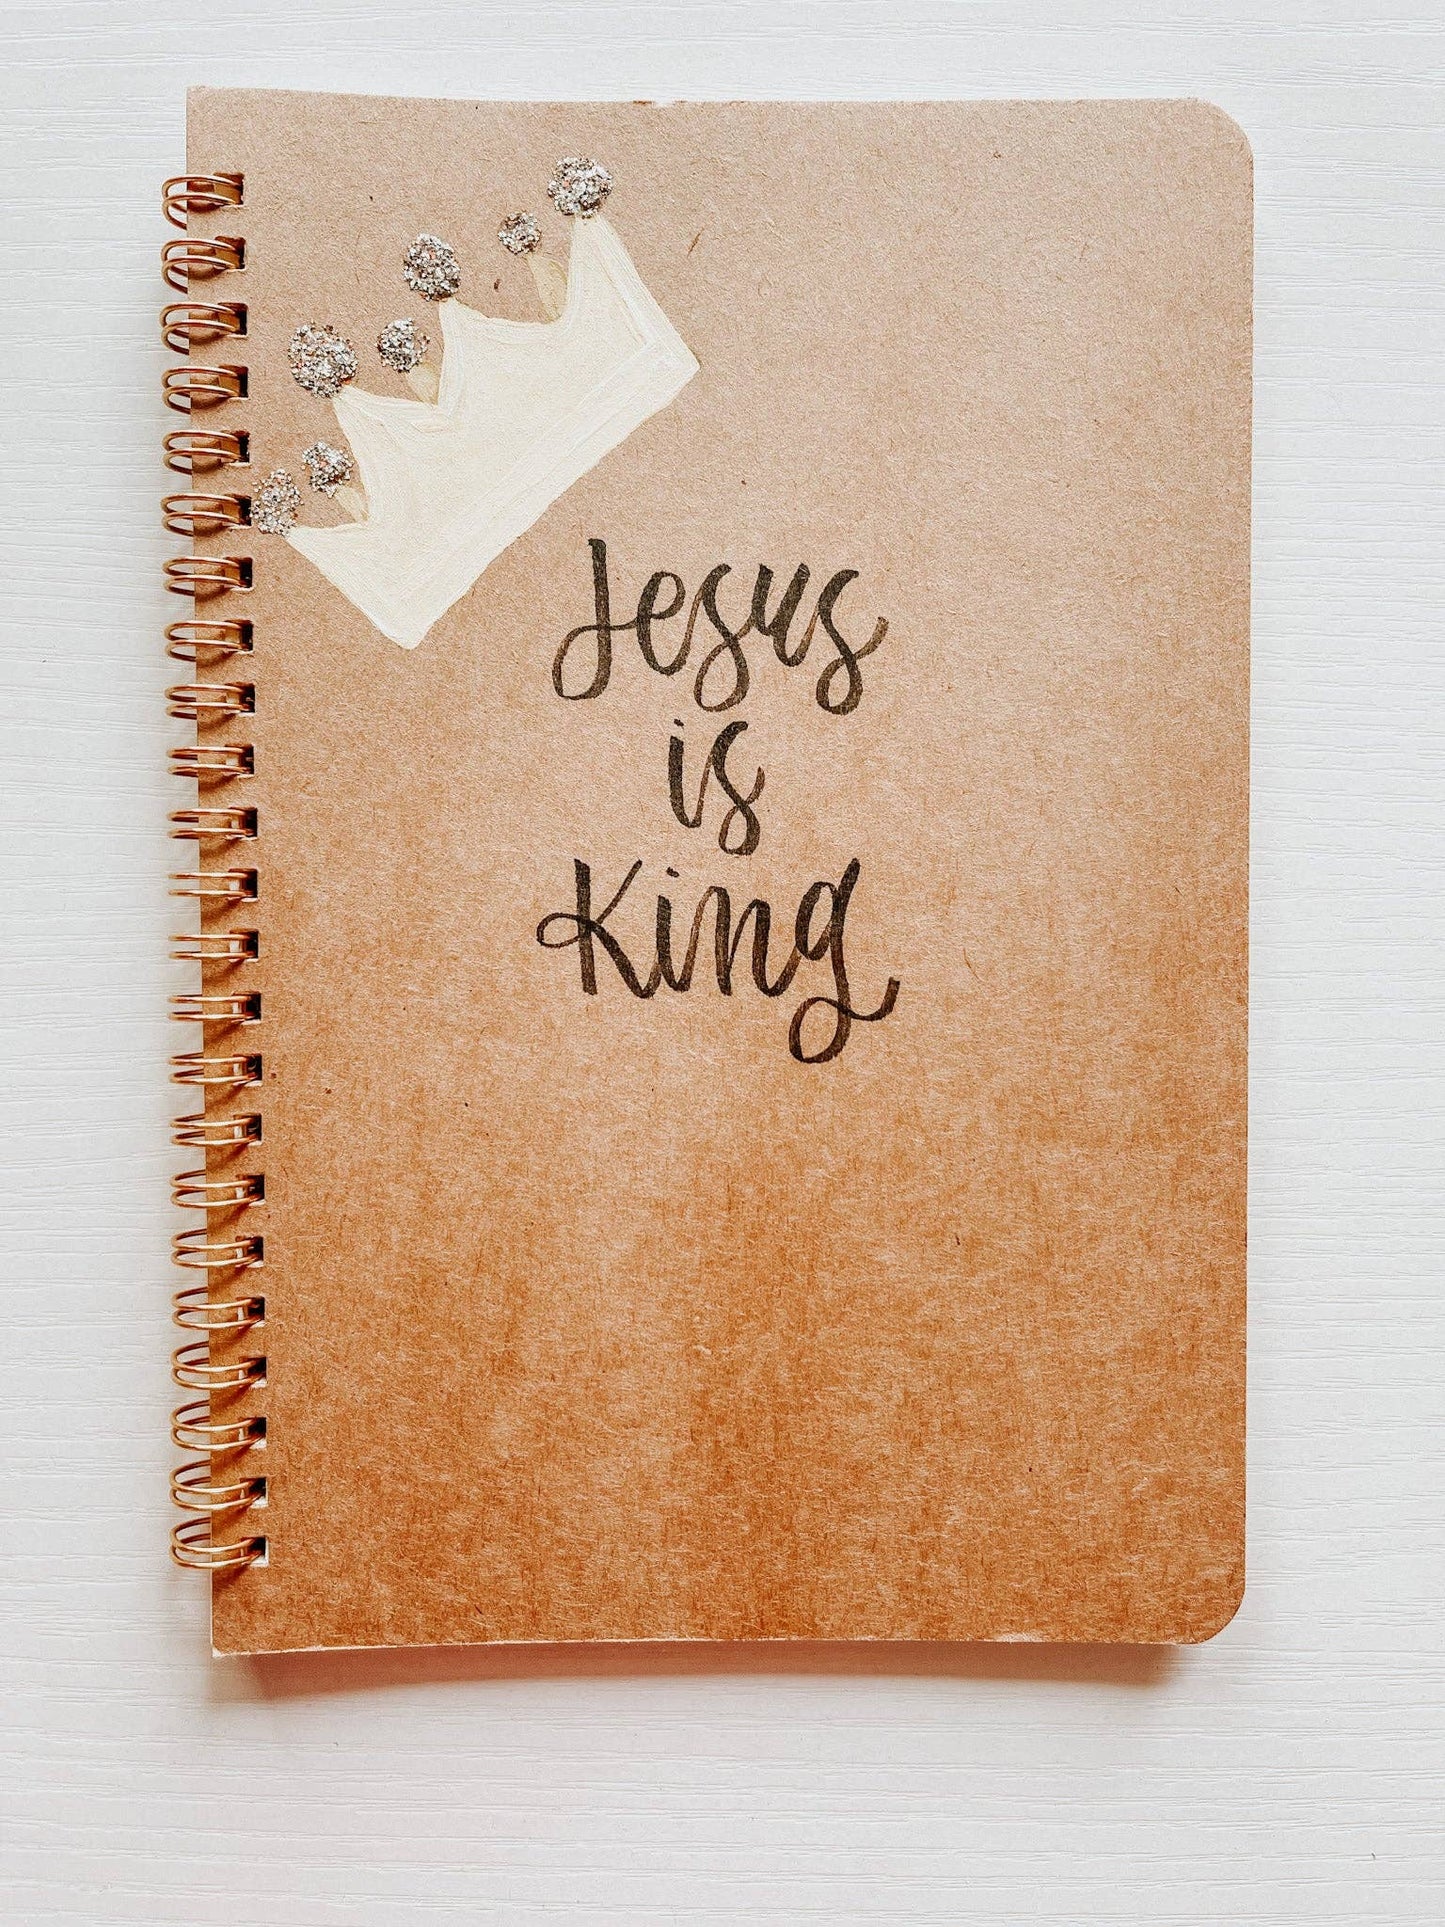 Jesus is King Hand-Painted Spiral Bound Journal